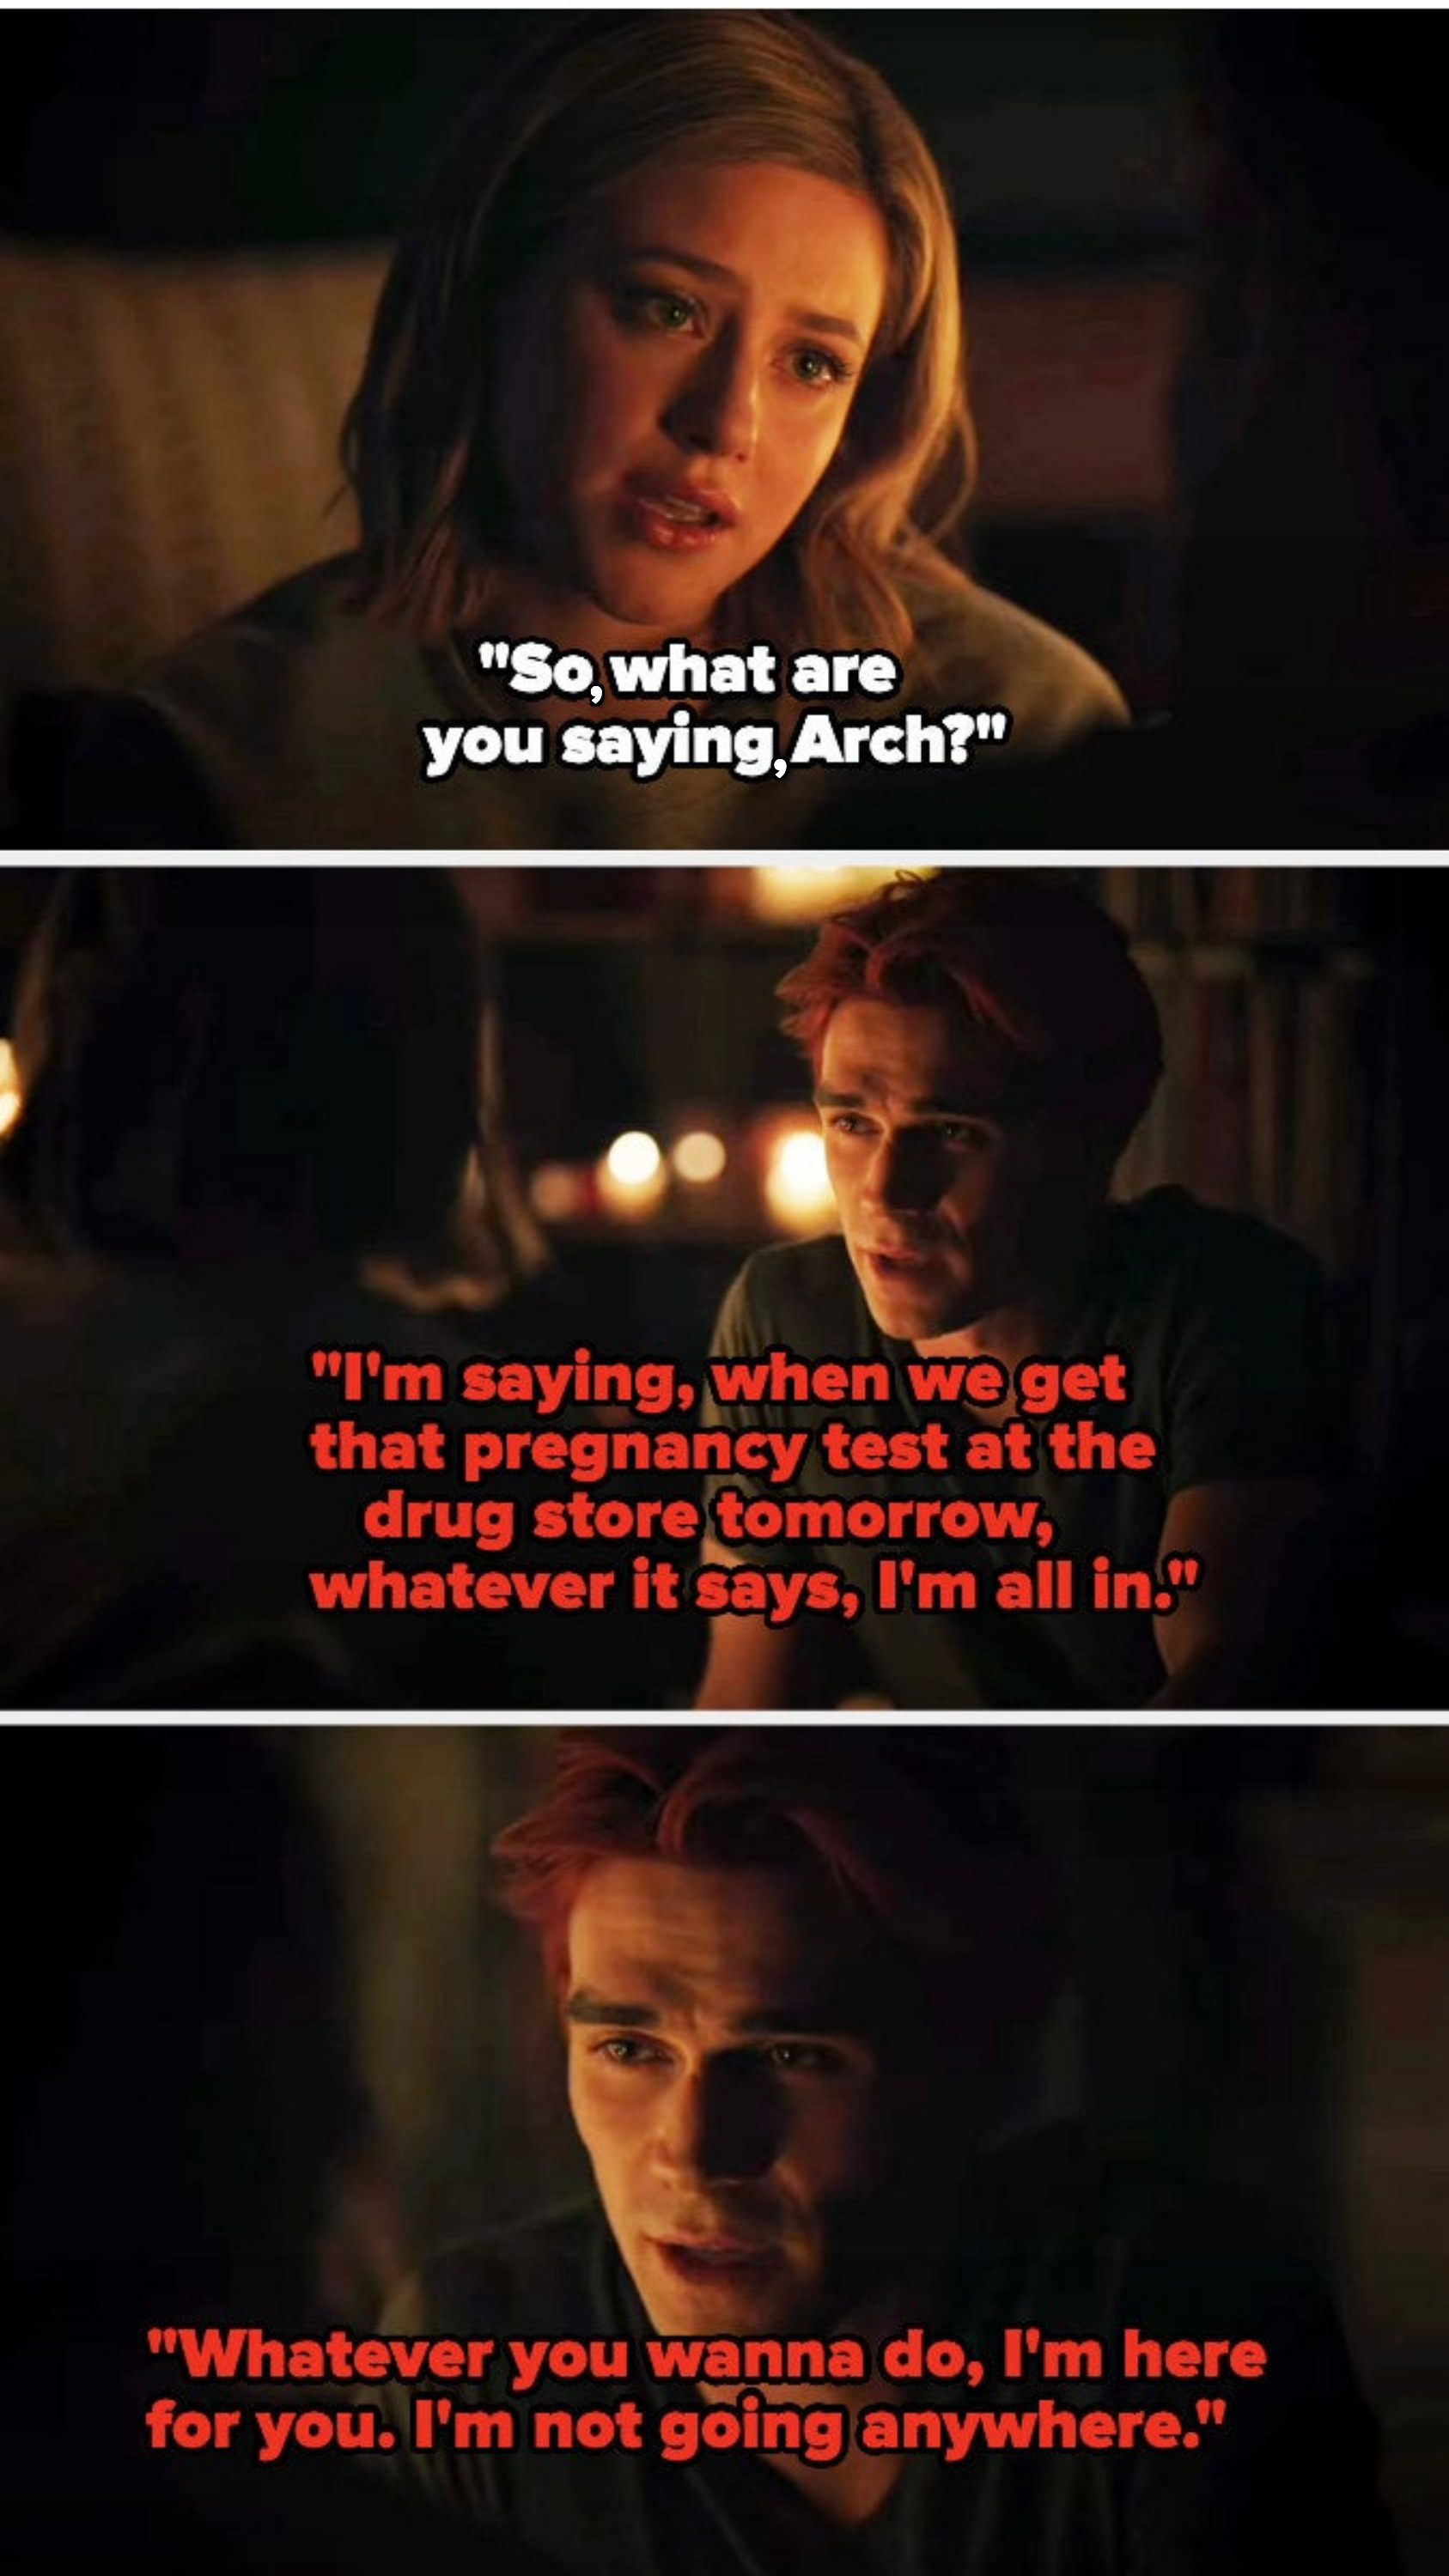 Archie tells Betty that whatever the pregnancy test tells them, he&#x27;s all in and whatever she wants to do, he&#x27;s here for her